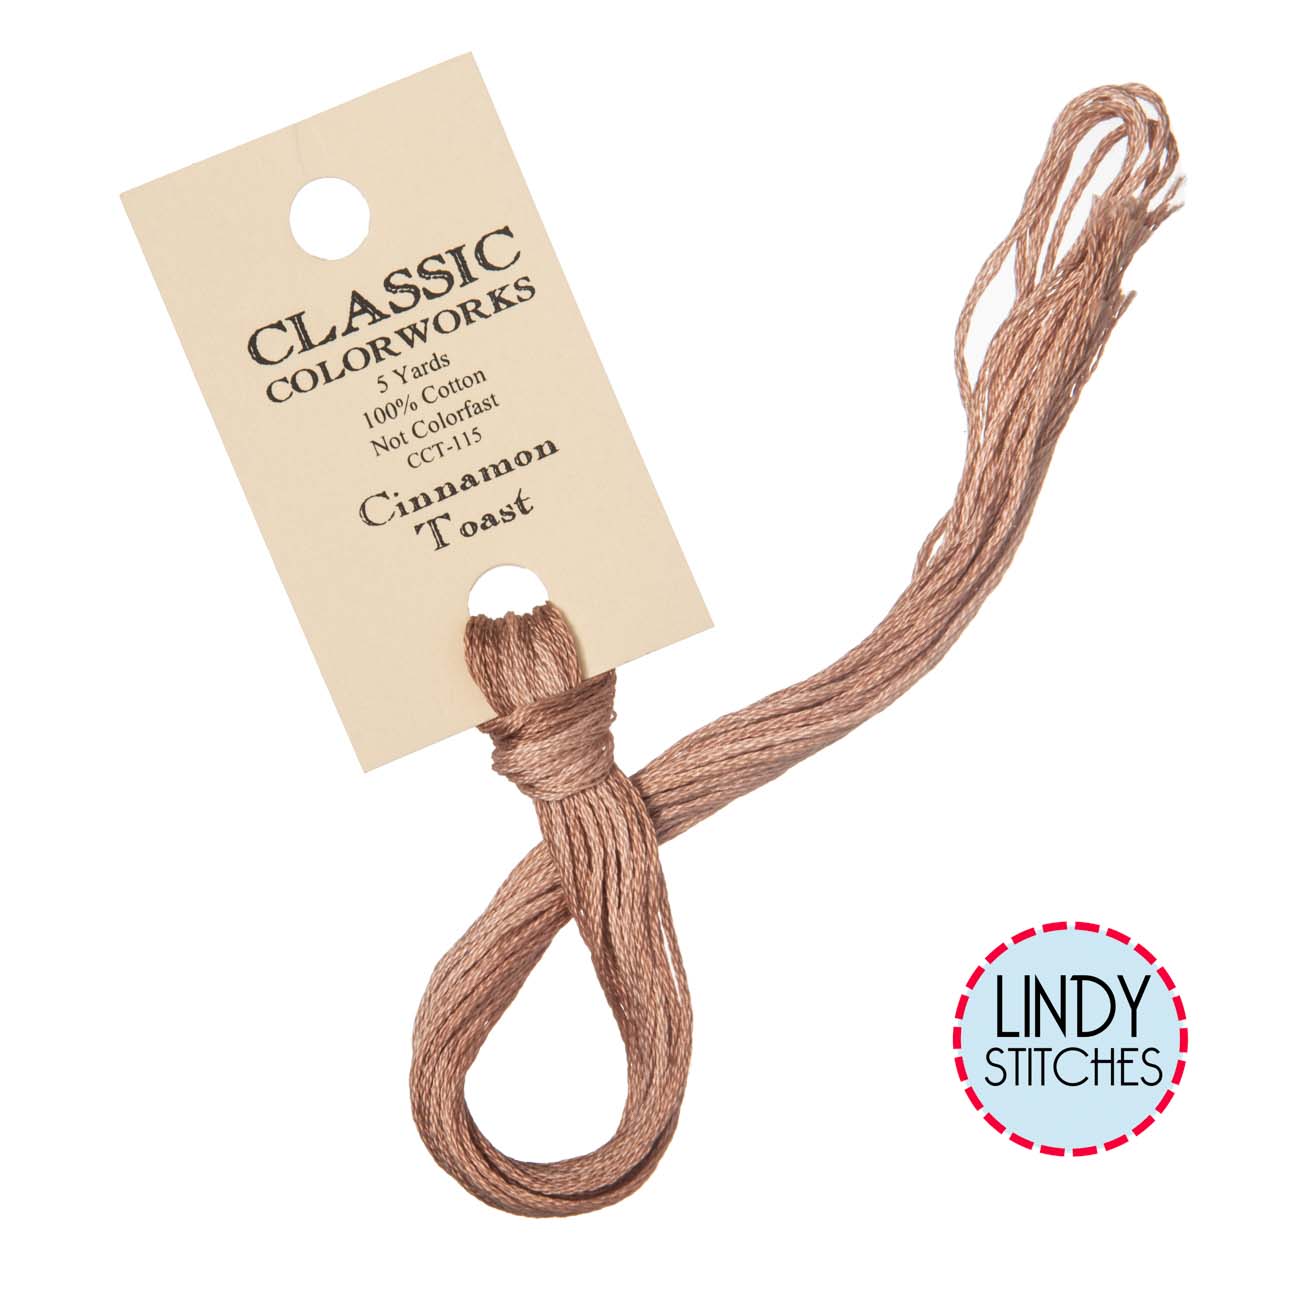 Cinnamon Toast Classic Colorworks Floss Hand Dyed Cotton Skein